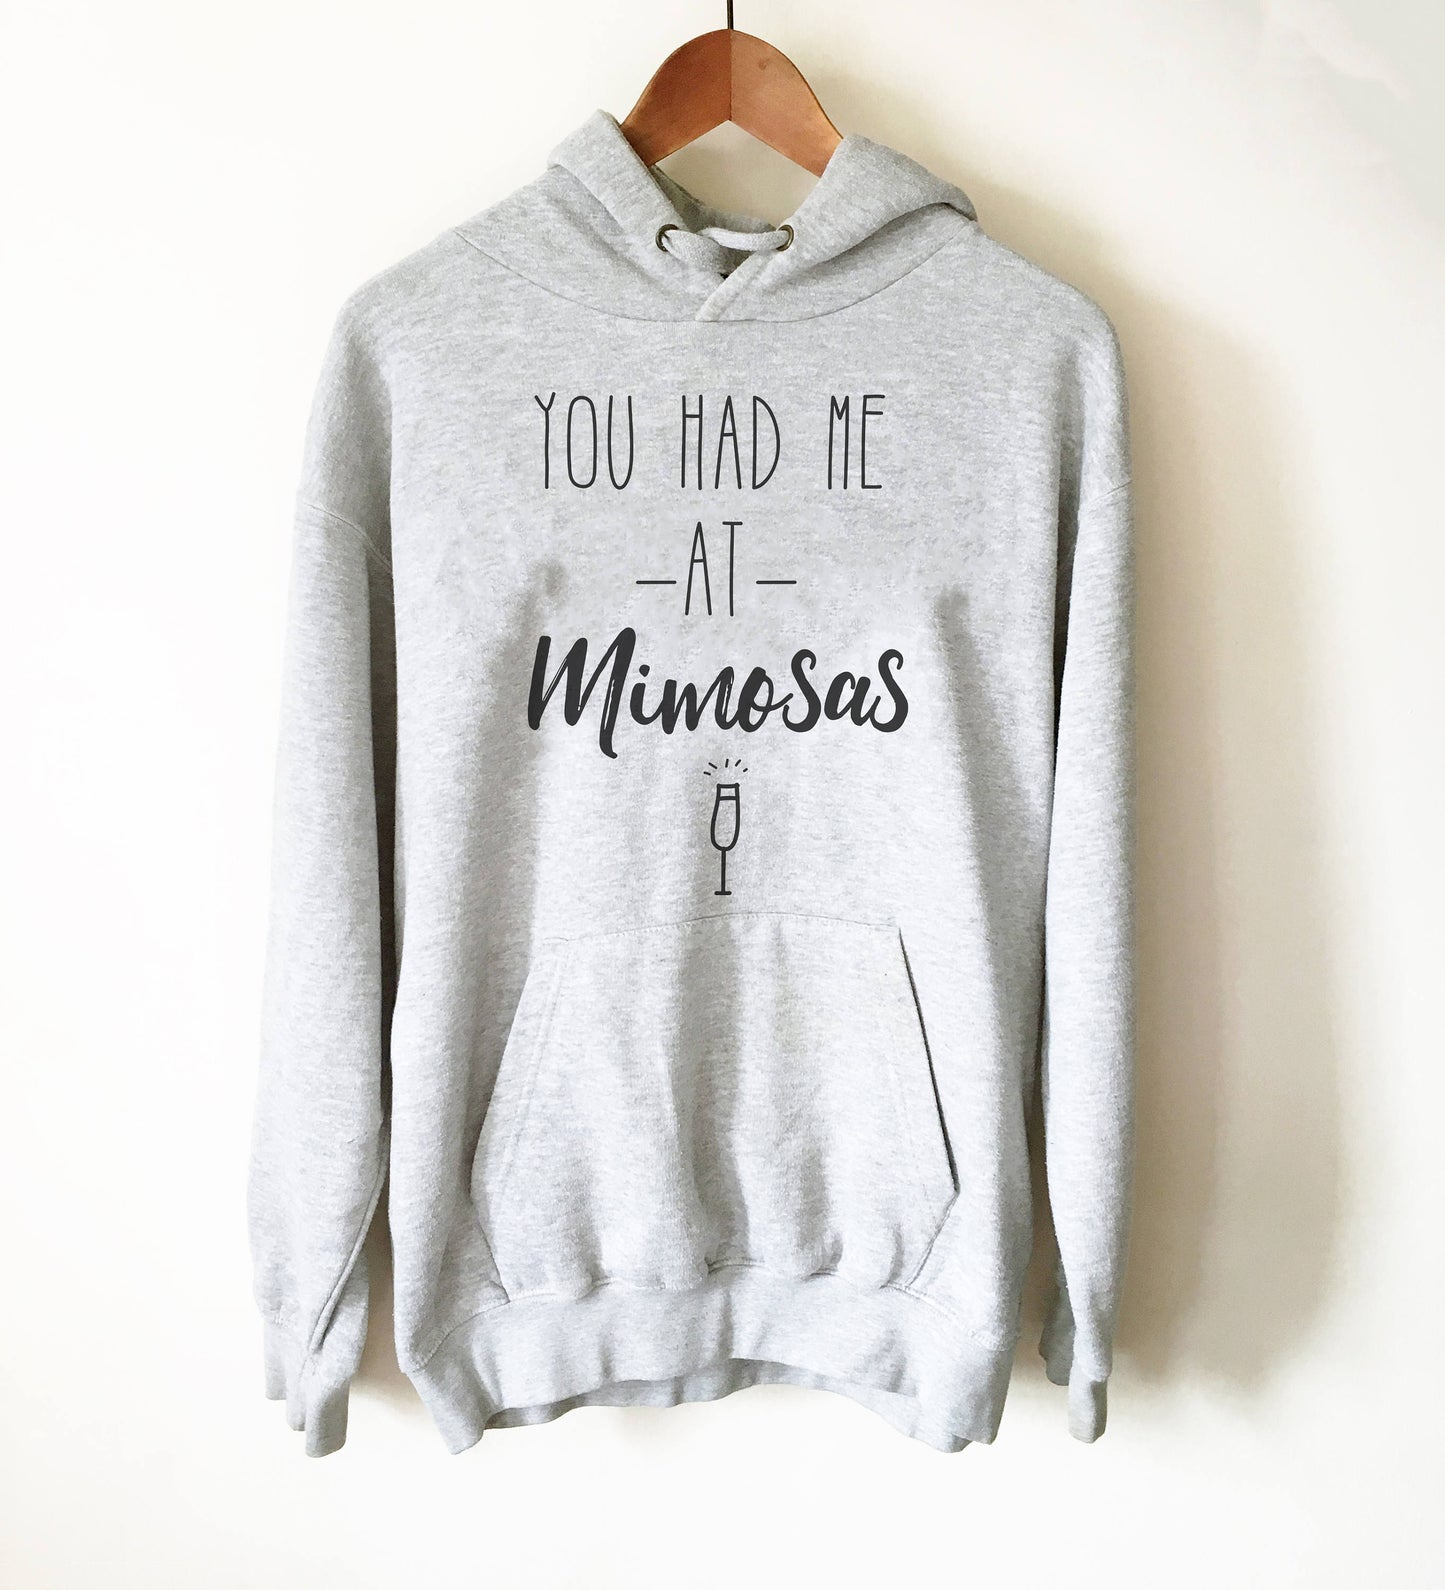 You Had Me At Mimosas Hoodie - Mimosa Shirt, Mimosa Shirts, Brunch shirt, Sunday Brunch Shirt, Brunch and Bubbly, Cocktail Shirt, Weekend